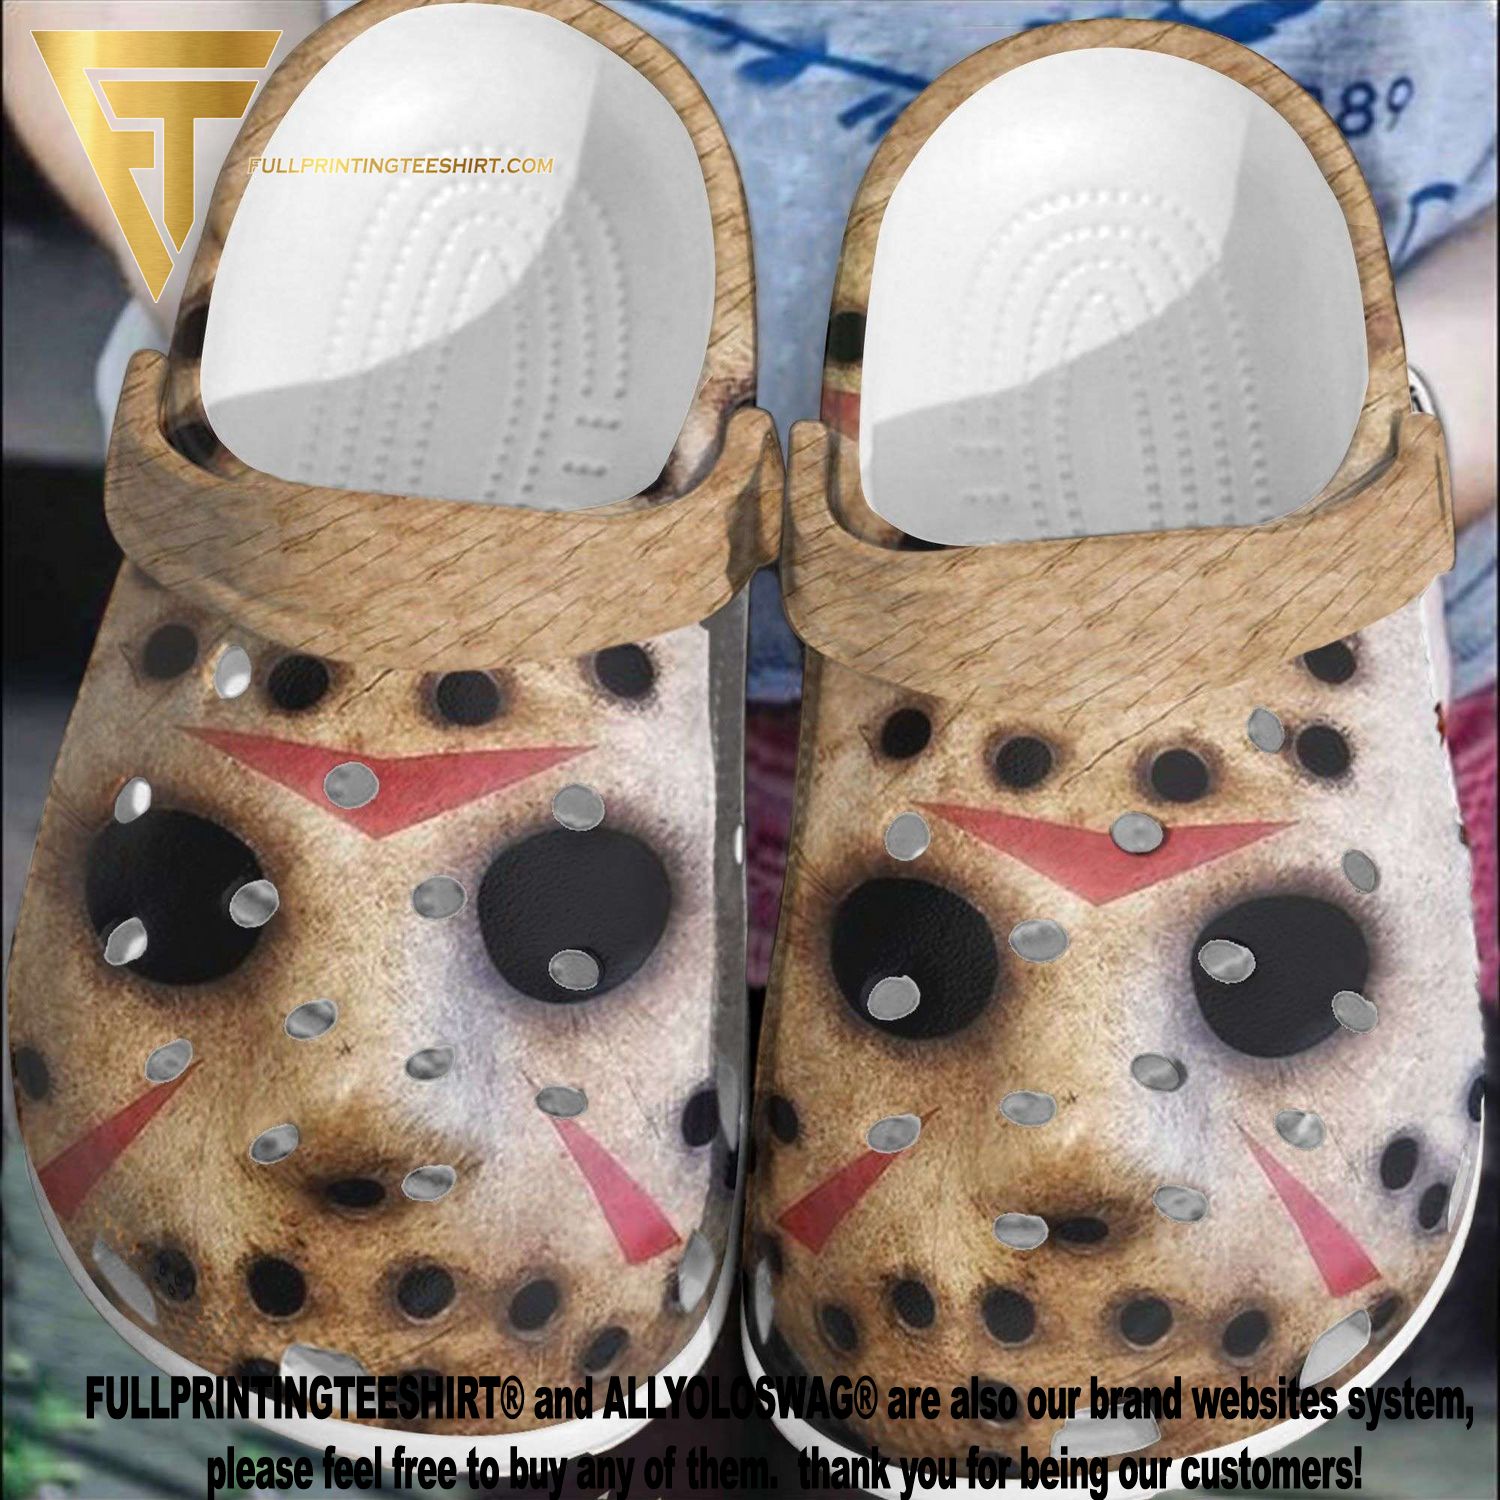 Gucci Ghost Pumpkin Crocs Crocband Shoes Halloween Gift - Family Gift Ideas  That Everyone Will Enjoy